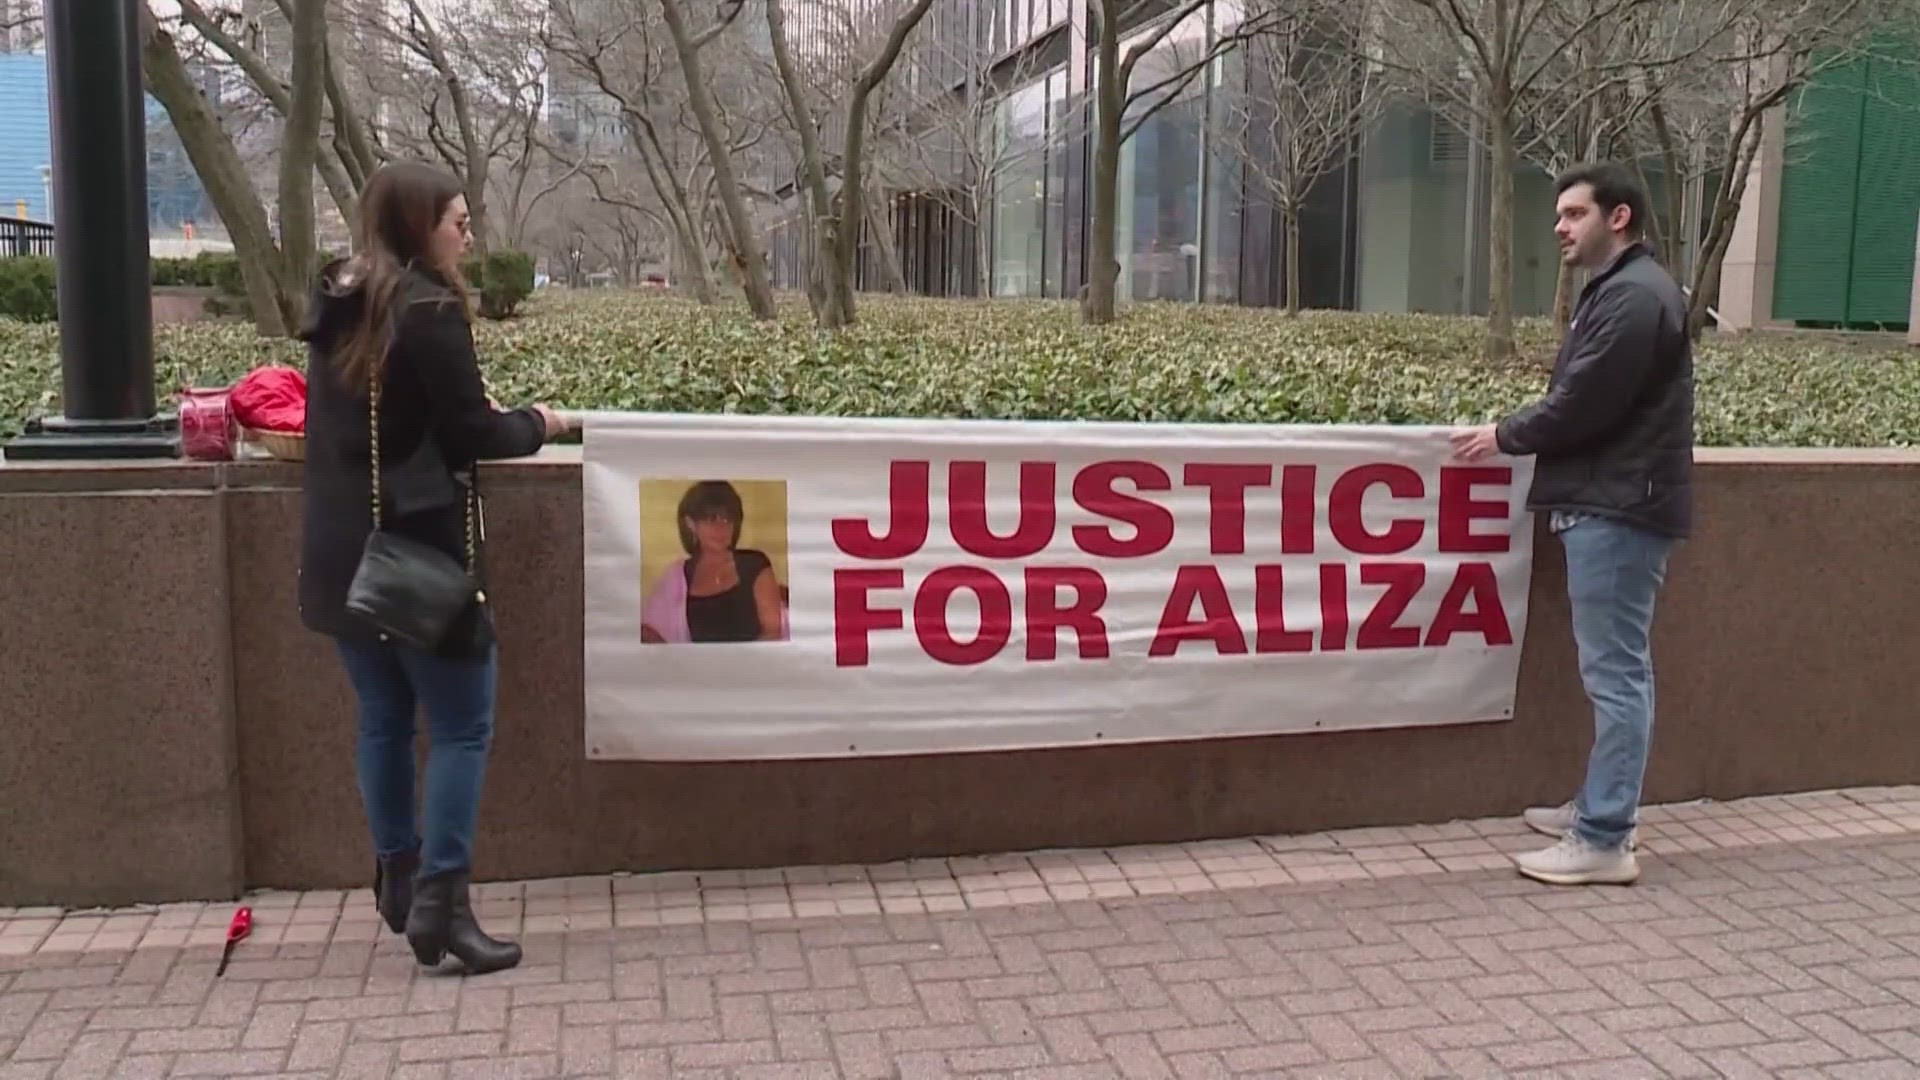 Aliza Sherman was stabbed 11 times in front of 75 Erieview Plaza on March 24, 2013.